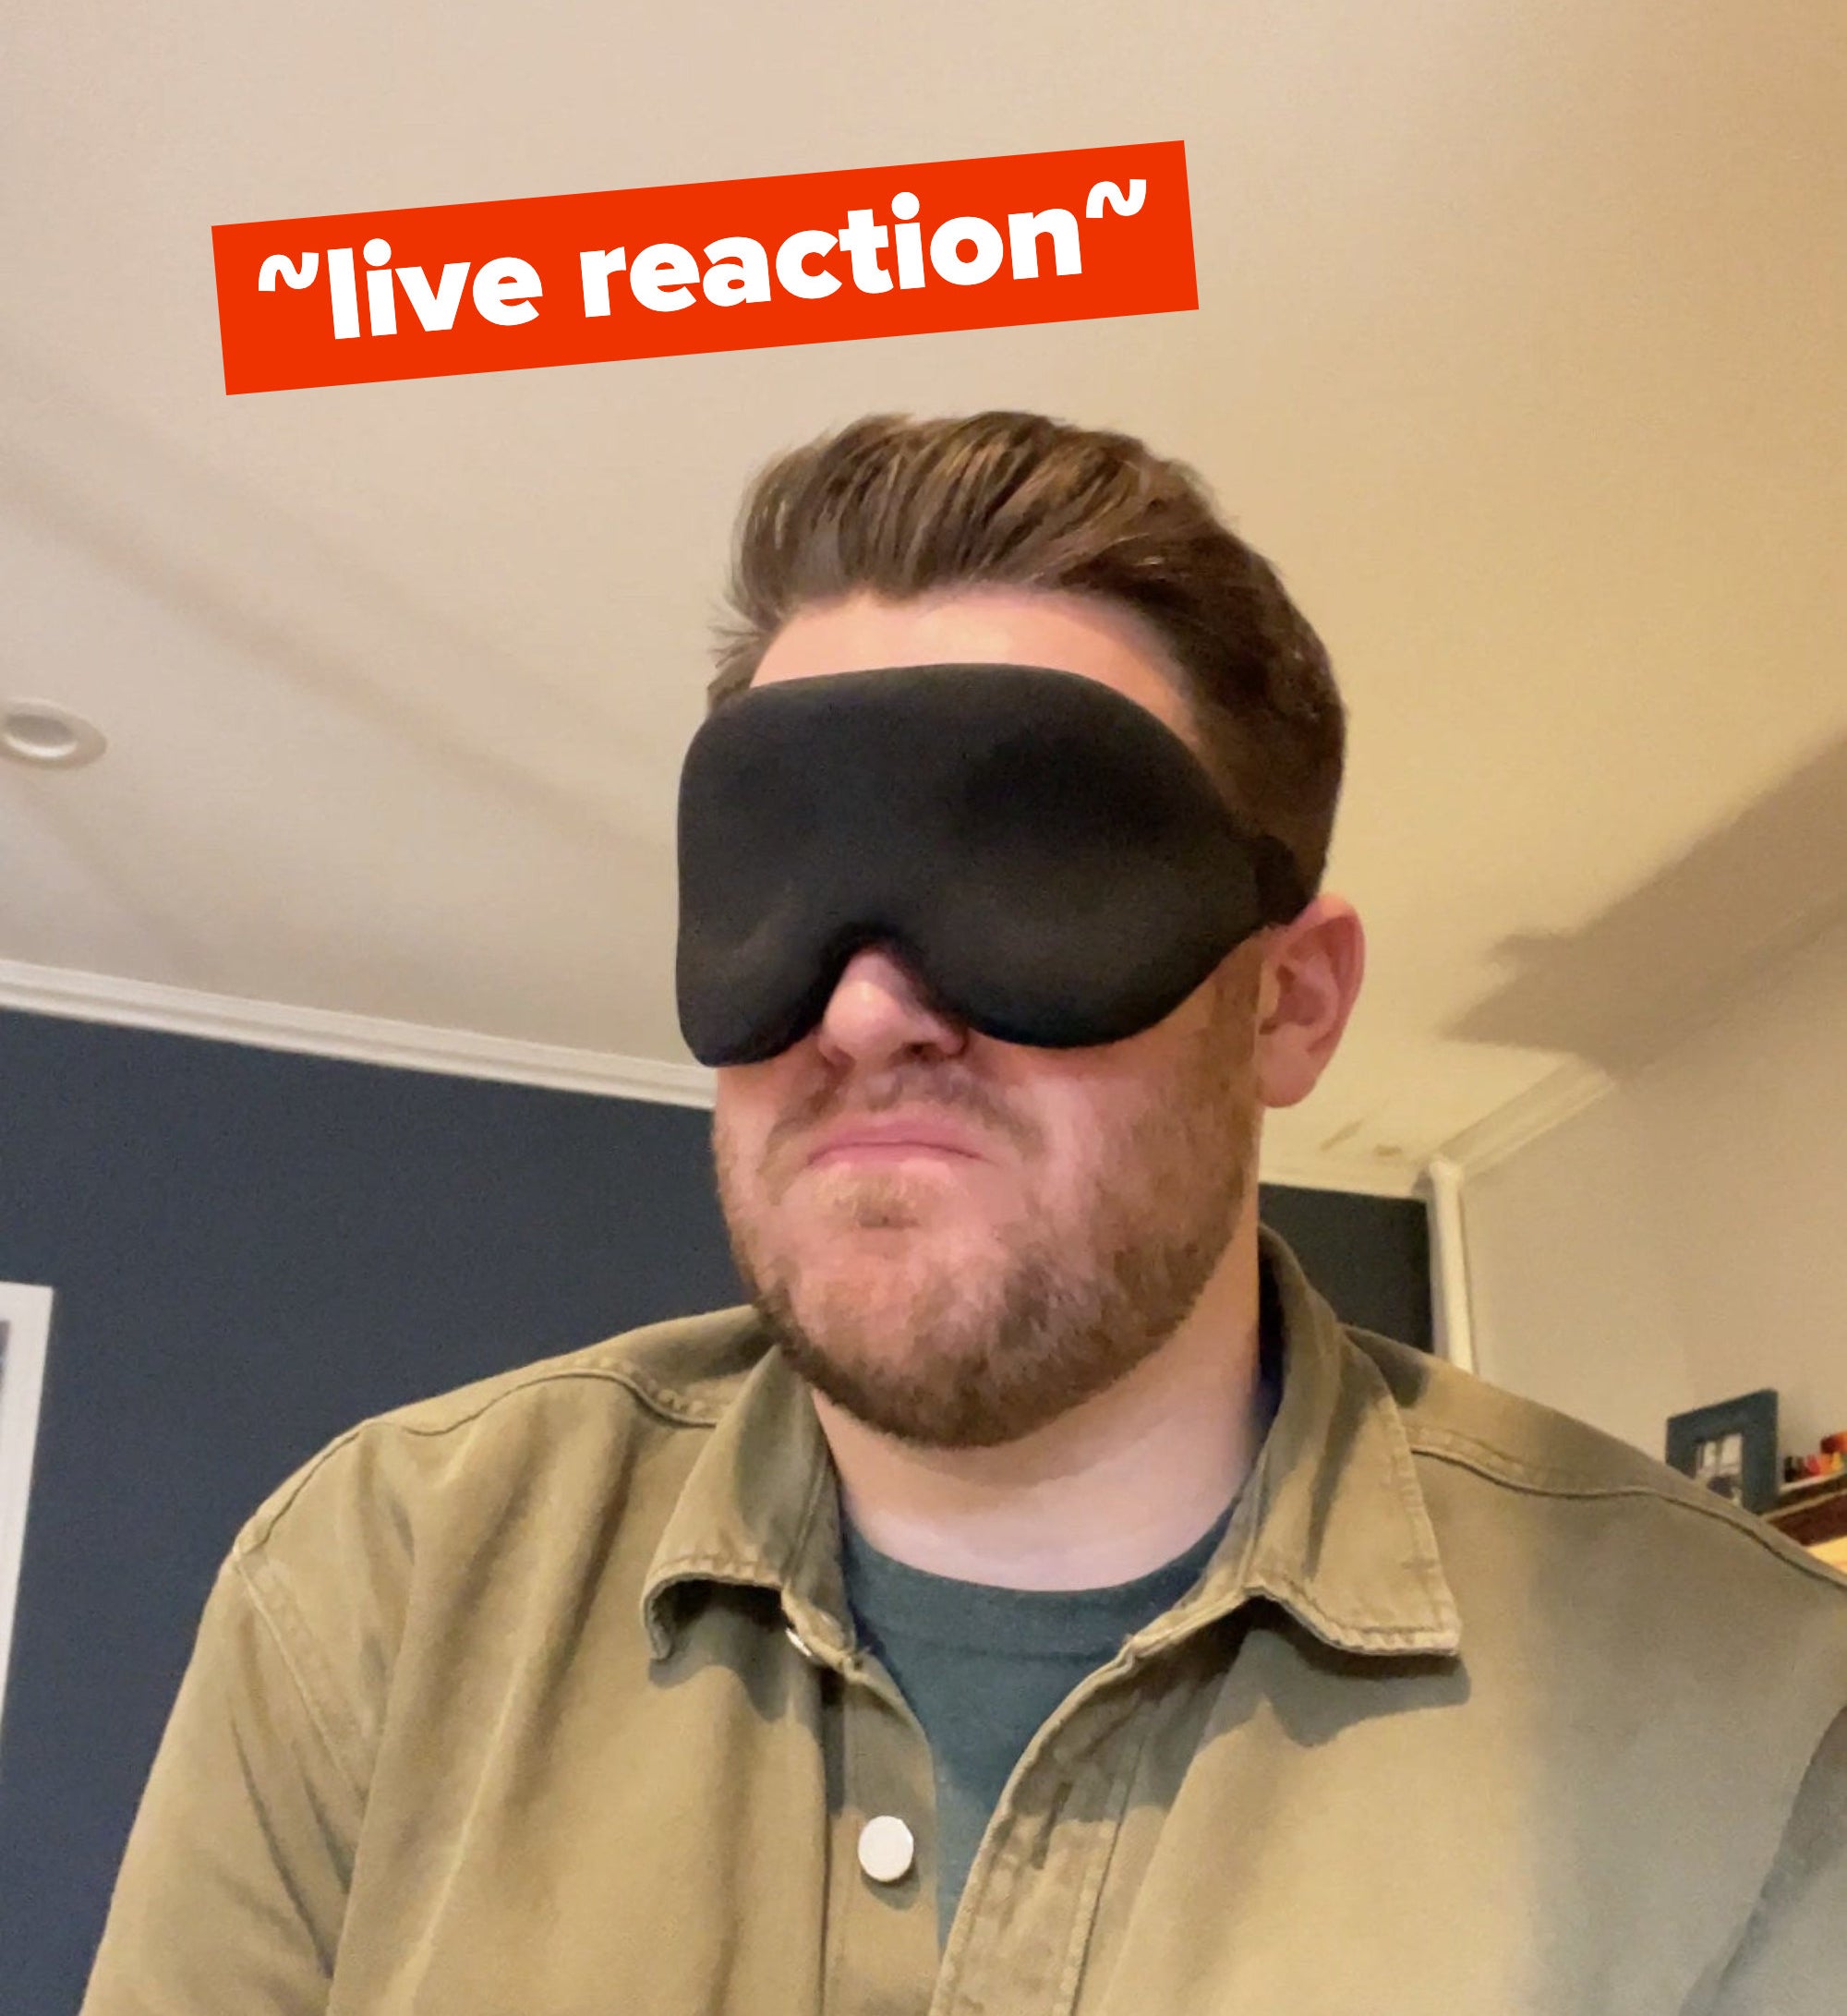 The writer looking grossed out, with a caption that says &quot;live reaction&quot;